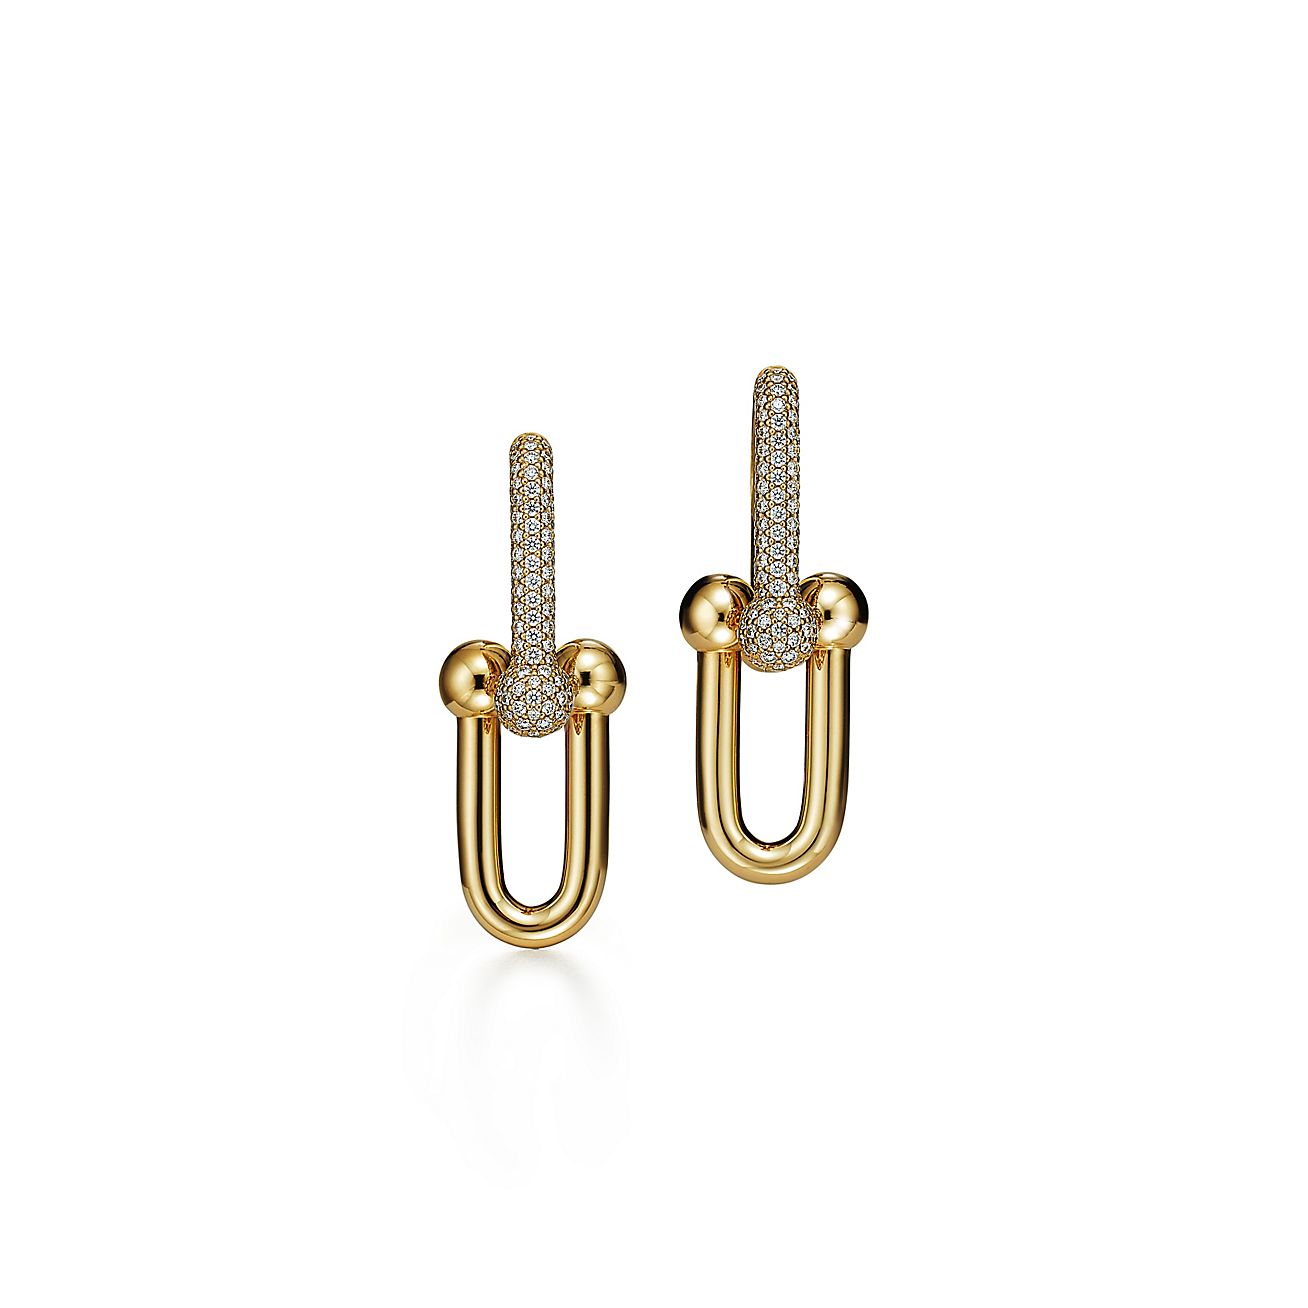 Tiffany HardWear Large Link Earrings in Yellow Gold with Pavé 